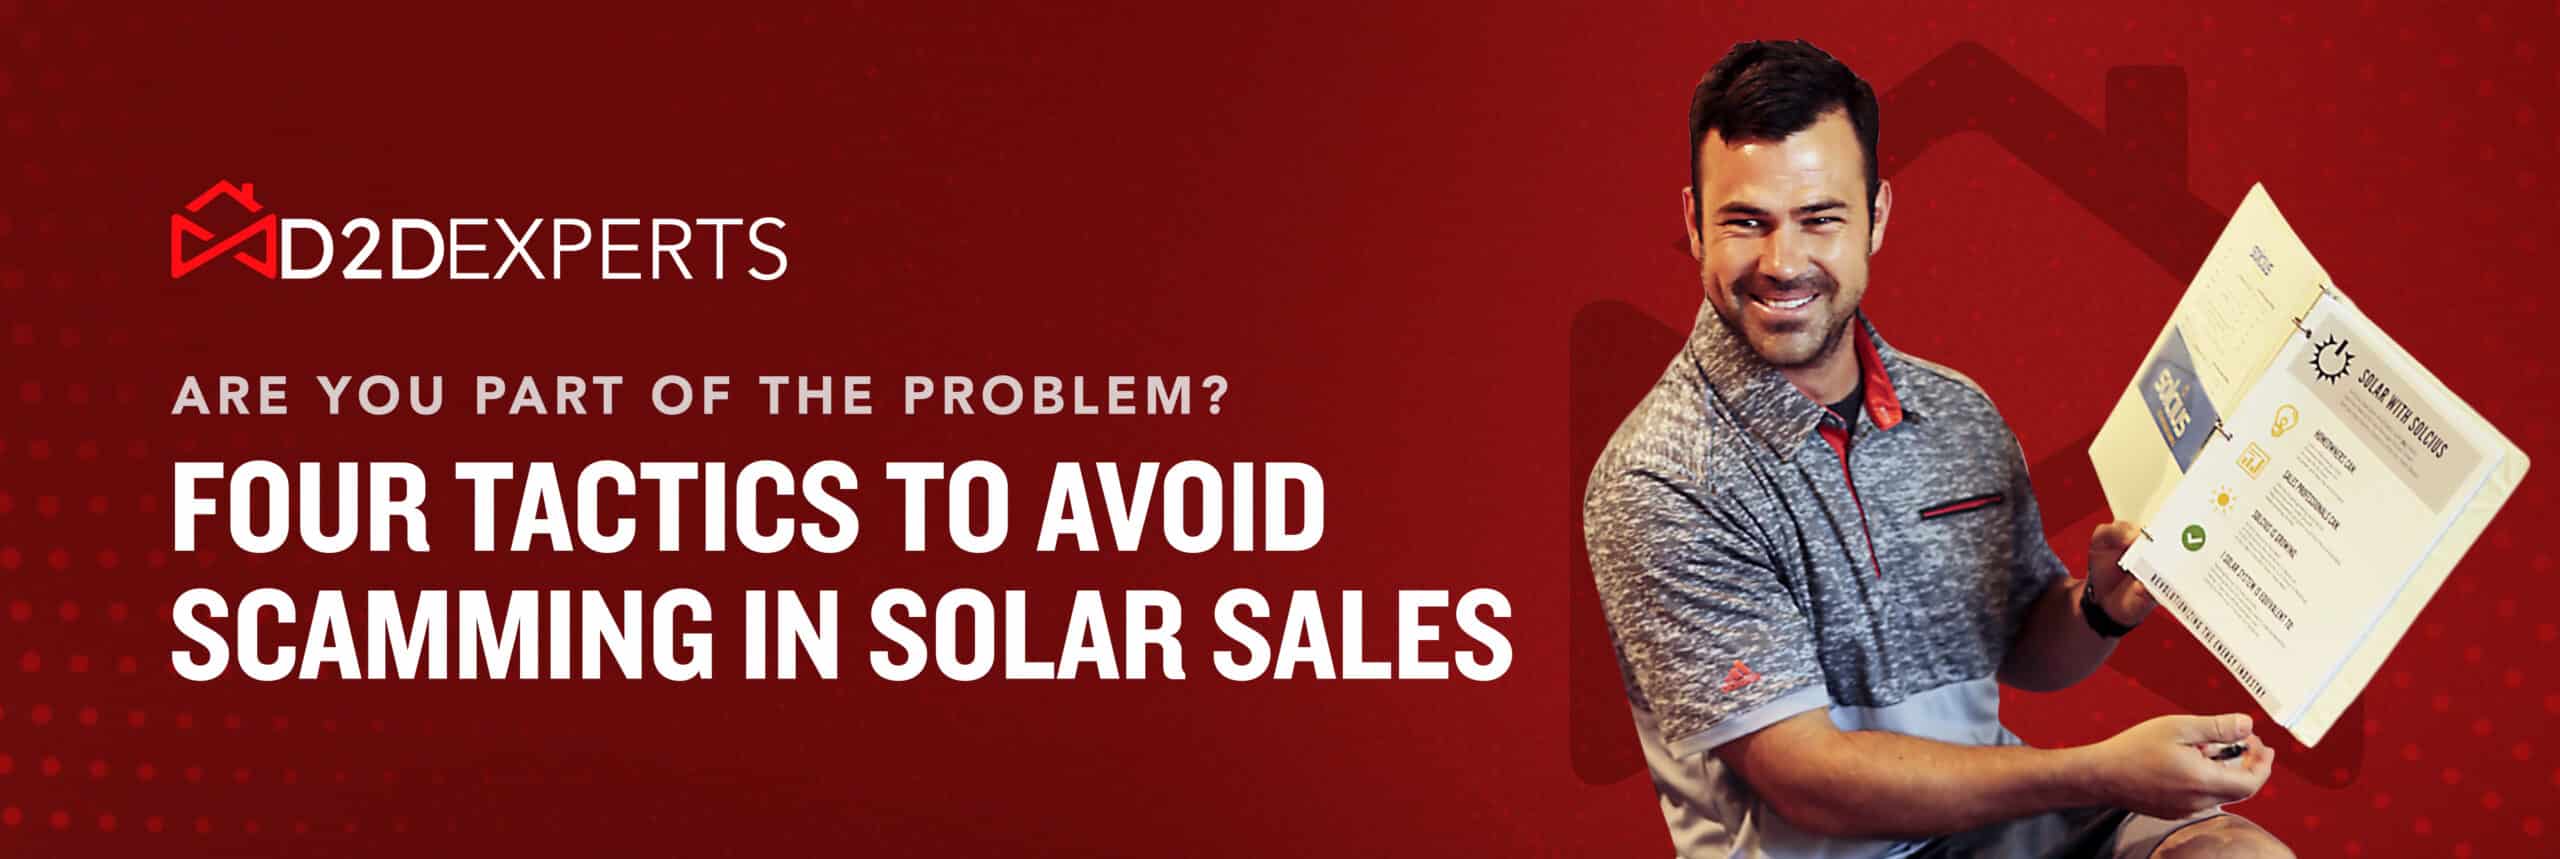 A confident sales professional holds a clipboard, promoting ethical practices with the message "are you part of the problem? four tactics to avoid scamming in solar sales" as part of a d2dexperts campaign.